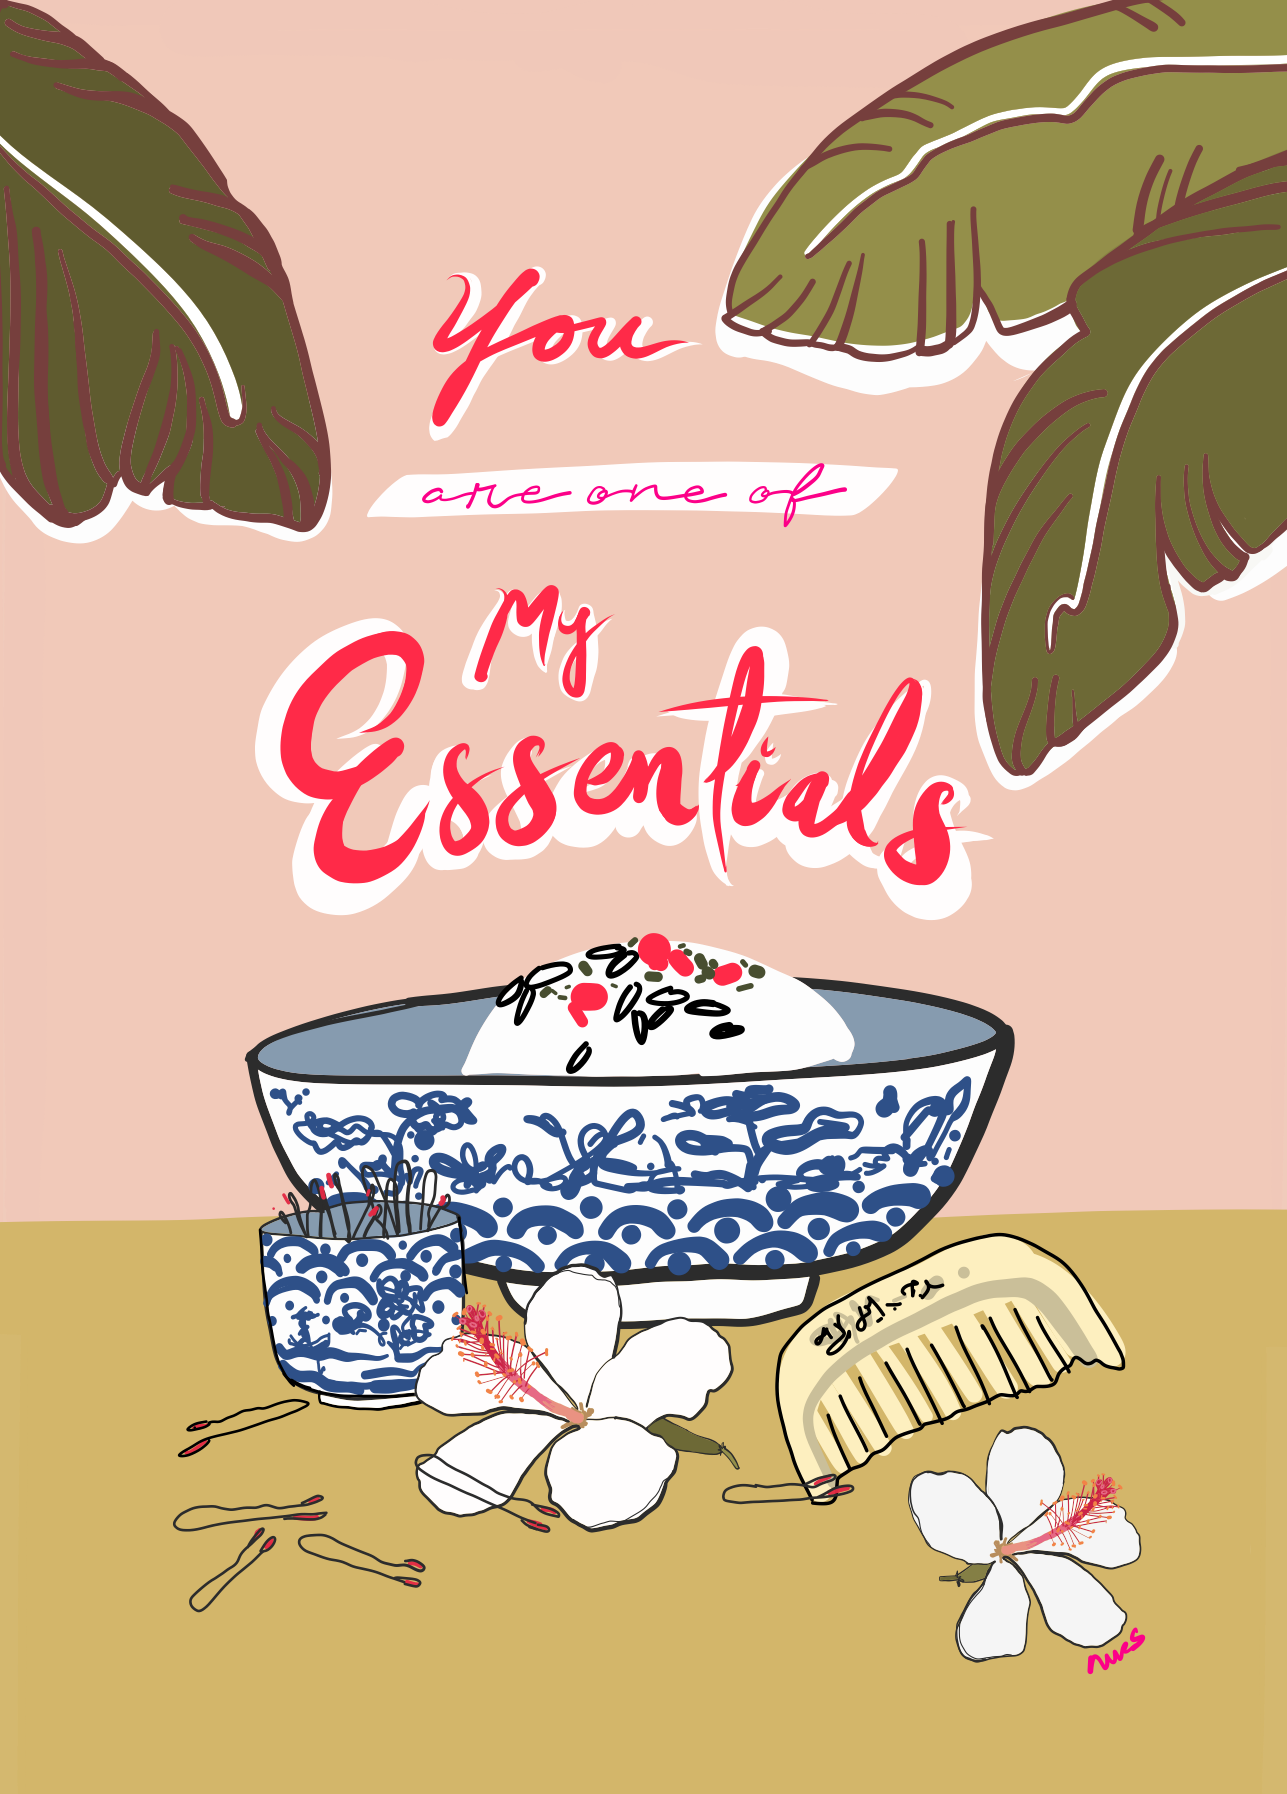 “You are one of my Essentials” Greeting Card - Margaret Rice Studio